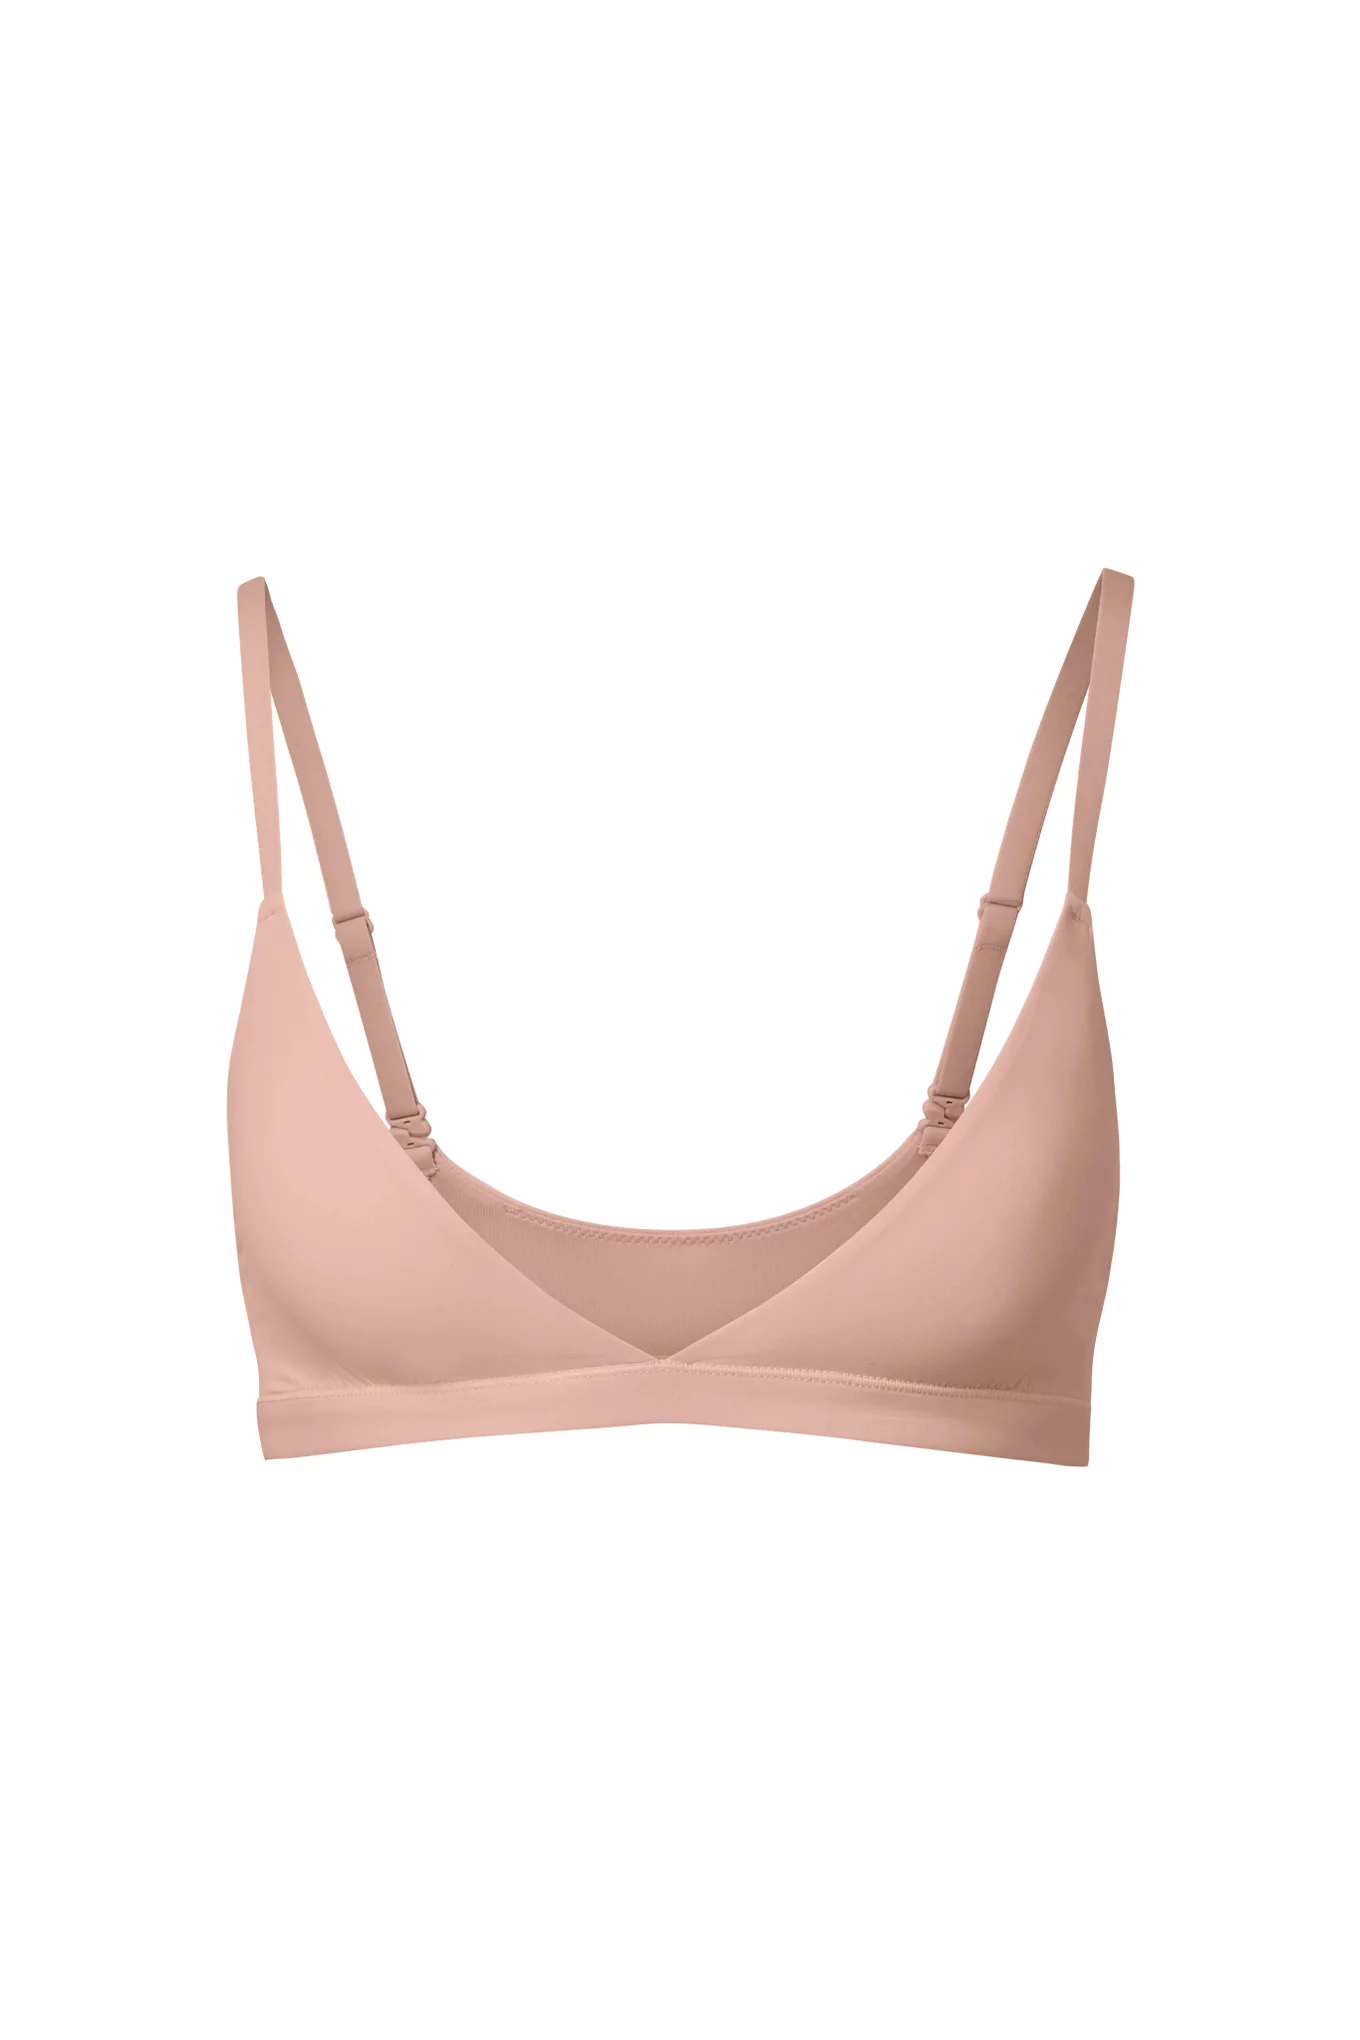 Skims Fits Everybody Lace Unlined Scoop Bra In Stock Availability and